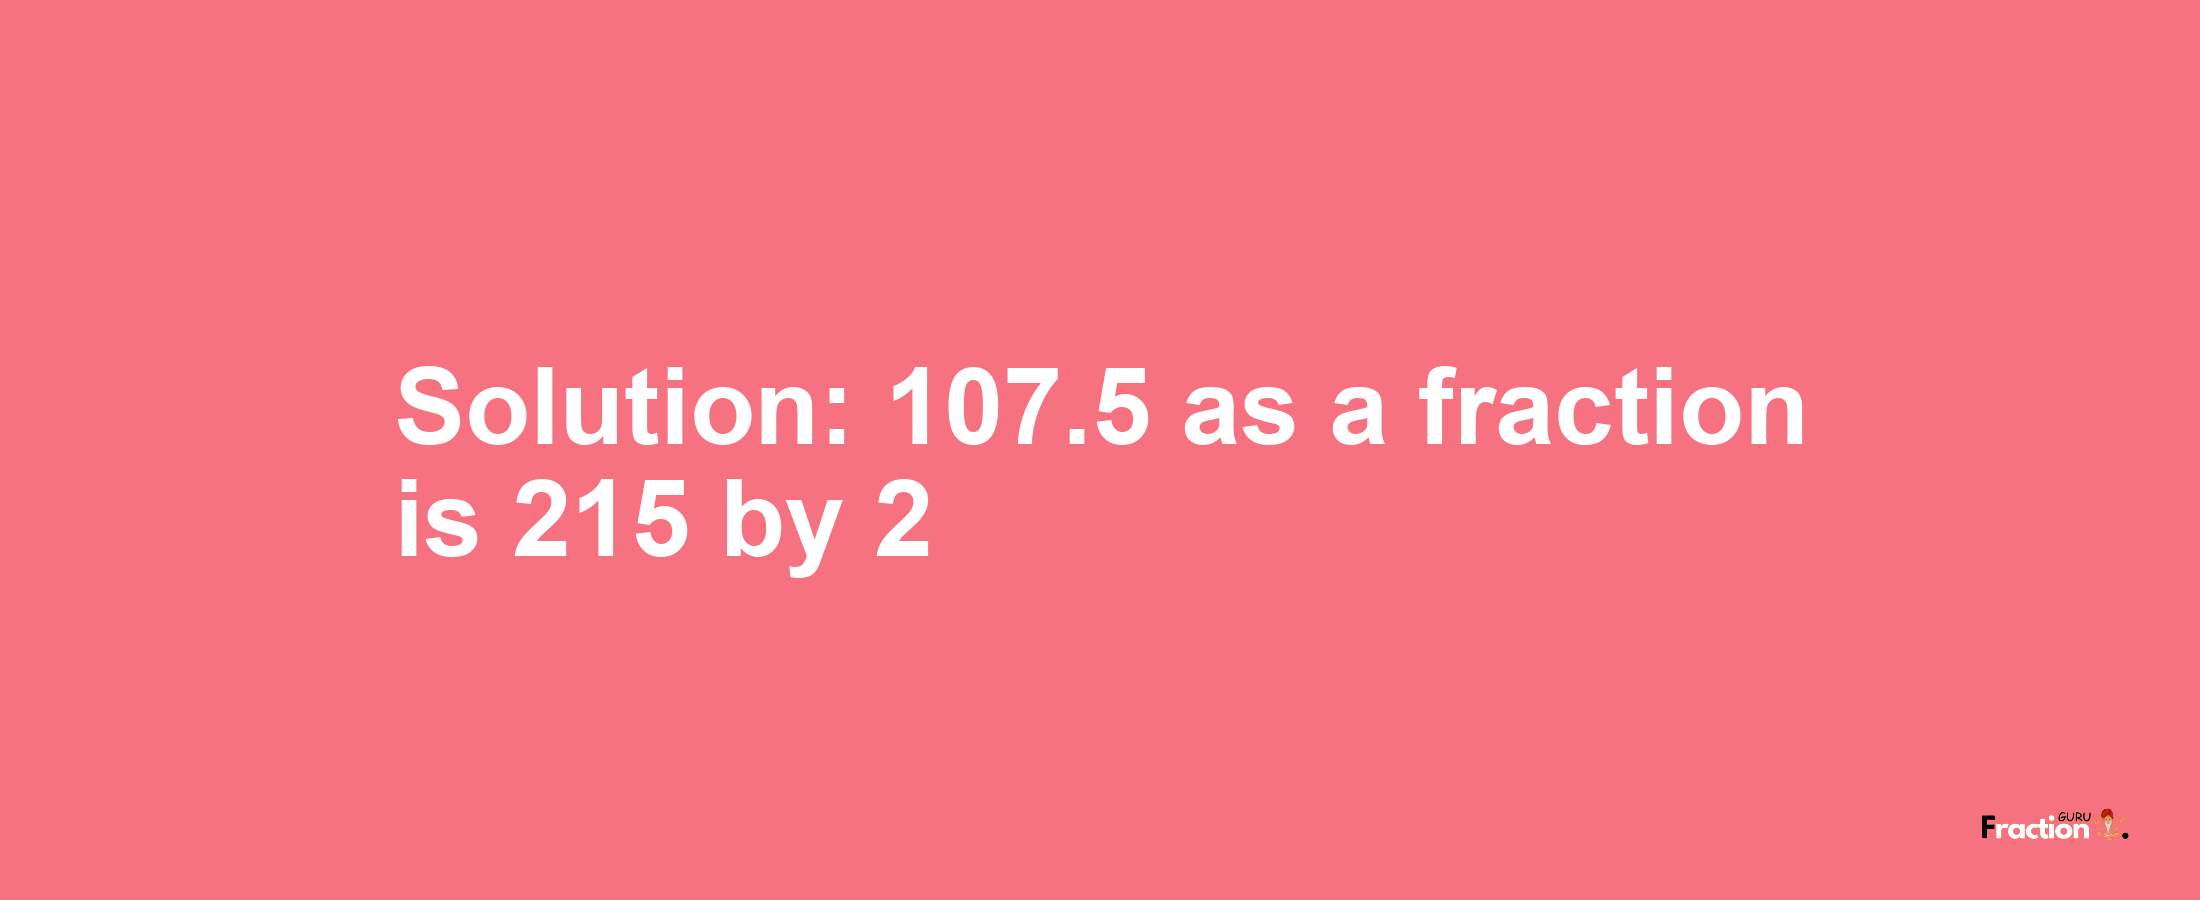 Solution:107.5 as a fraction is 215/2